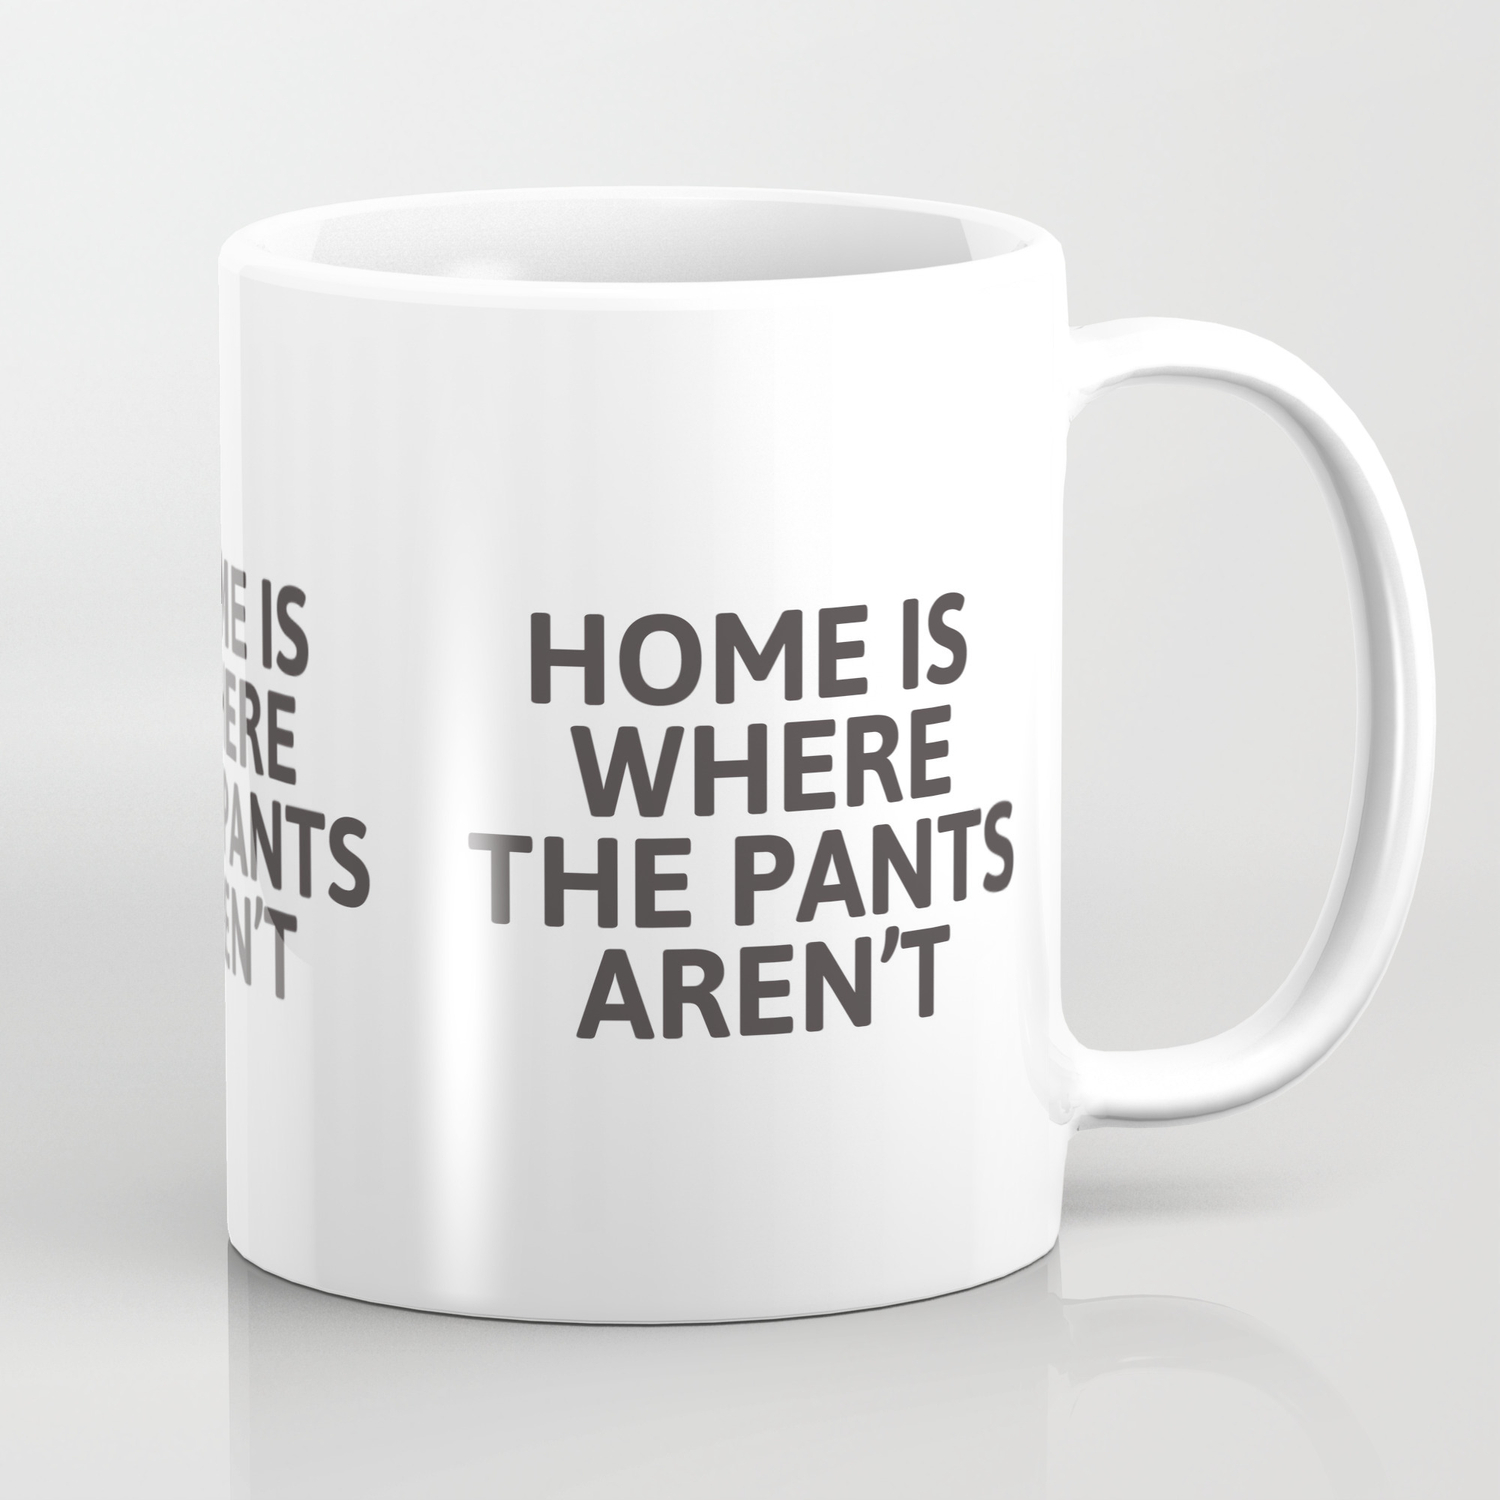 Details about  / Home Is Where The Pants Aren/'t Funny Illustrated Coffee Mug Drink Cup